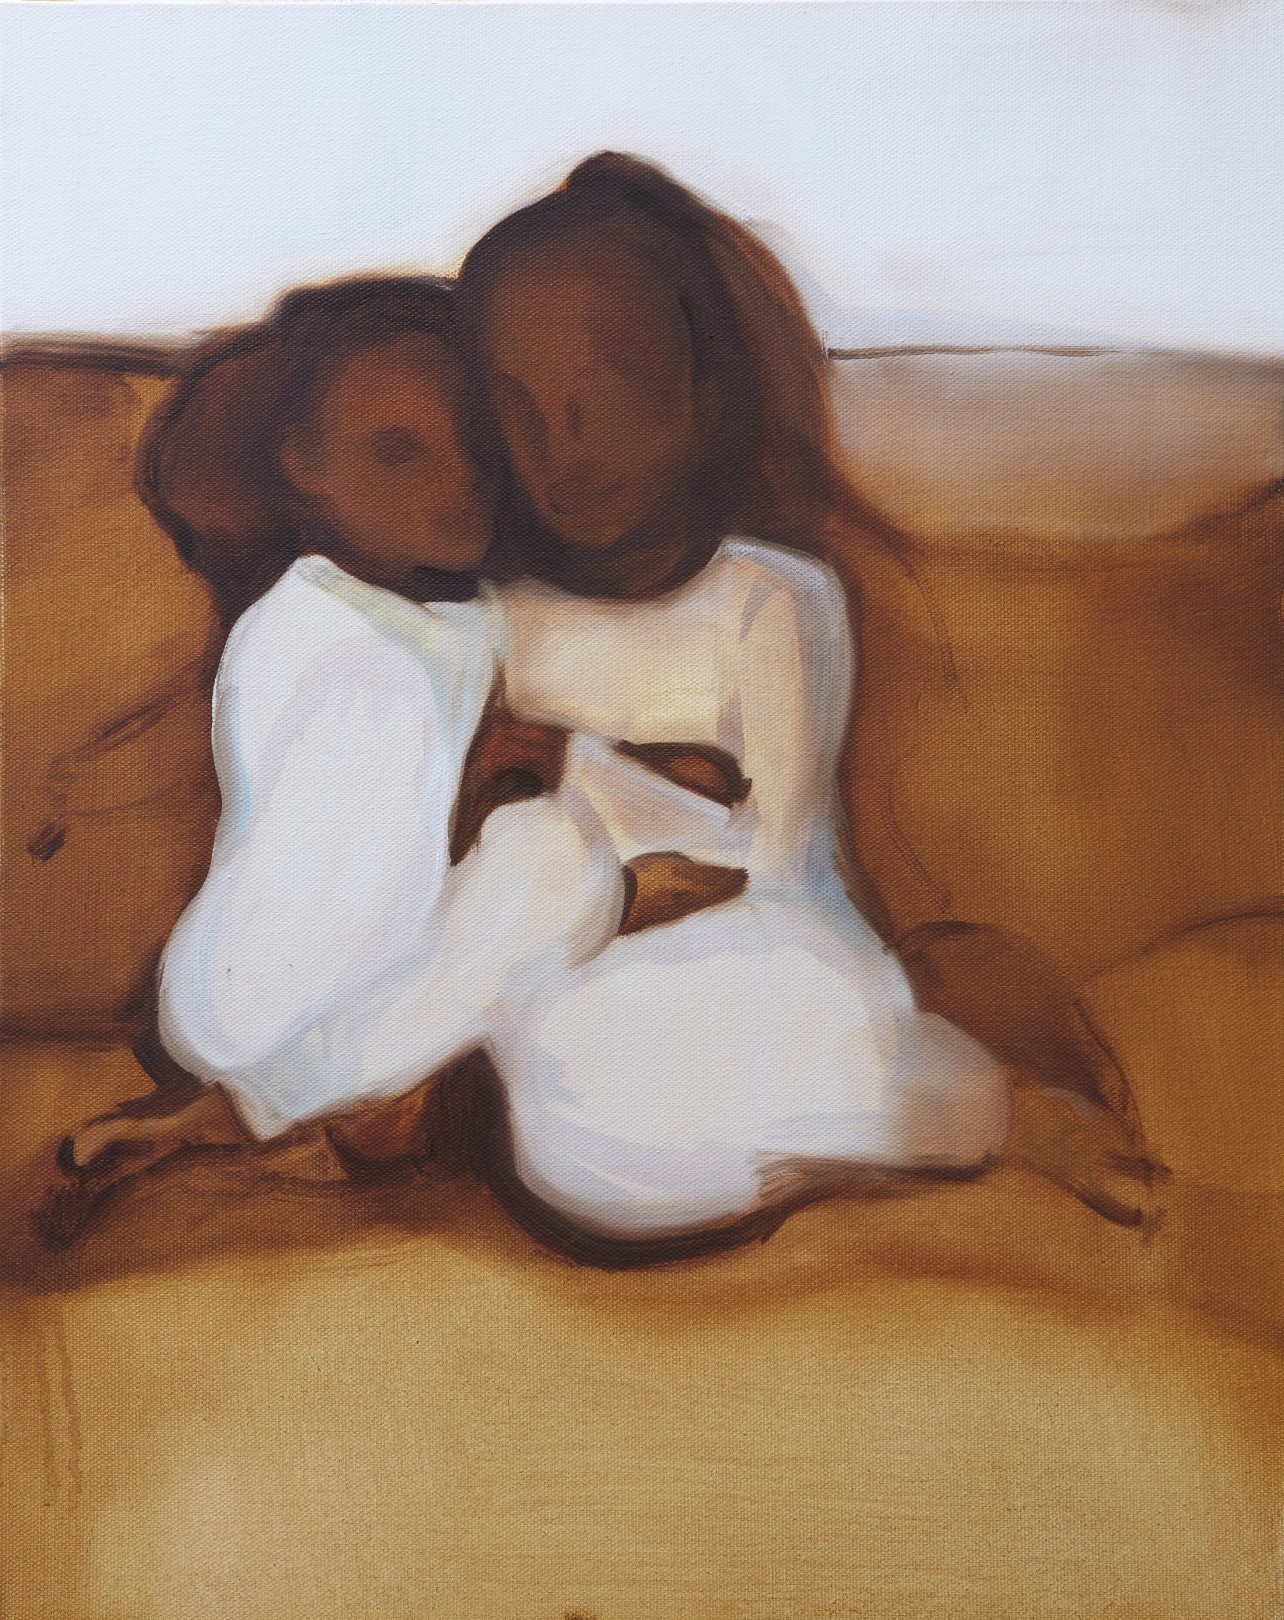 Aliyah and Fifi (on the couch), 2021 Oil on canvas 46 x 36 cm. / 18 x 14 in.